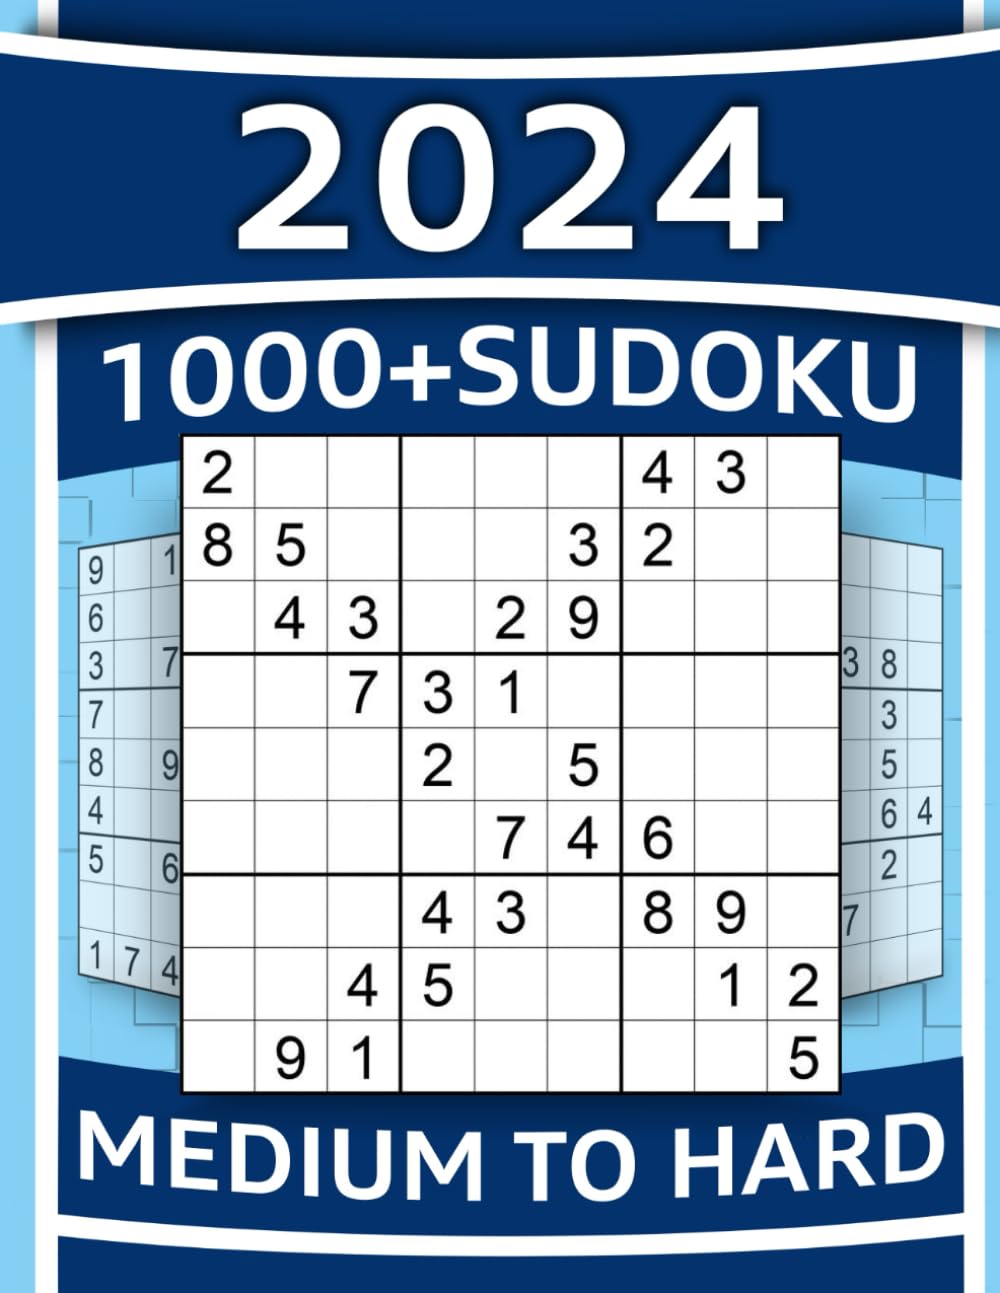 1000+ Sudoku Puzzles for Adults: Medium to Hard Sudoku Puzzles with Detailed Step-by-step Solutions and Hints When You Get Stuck